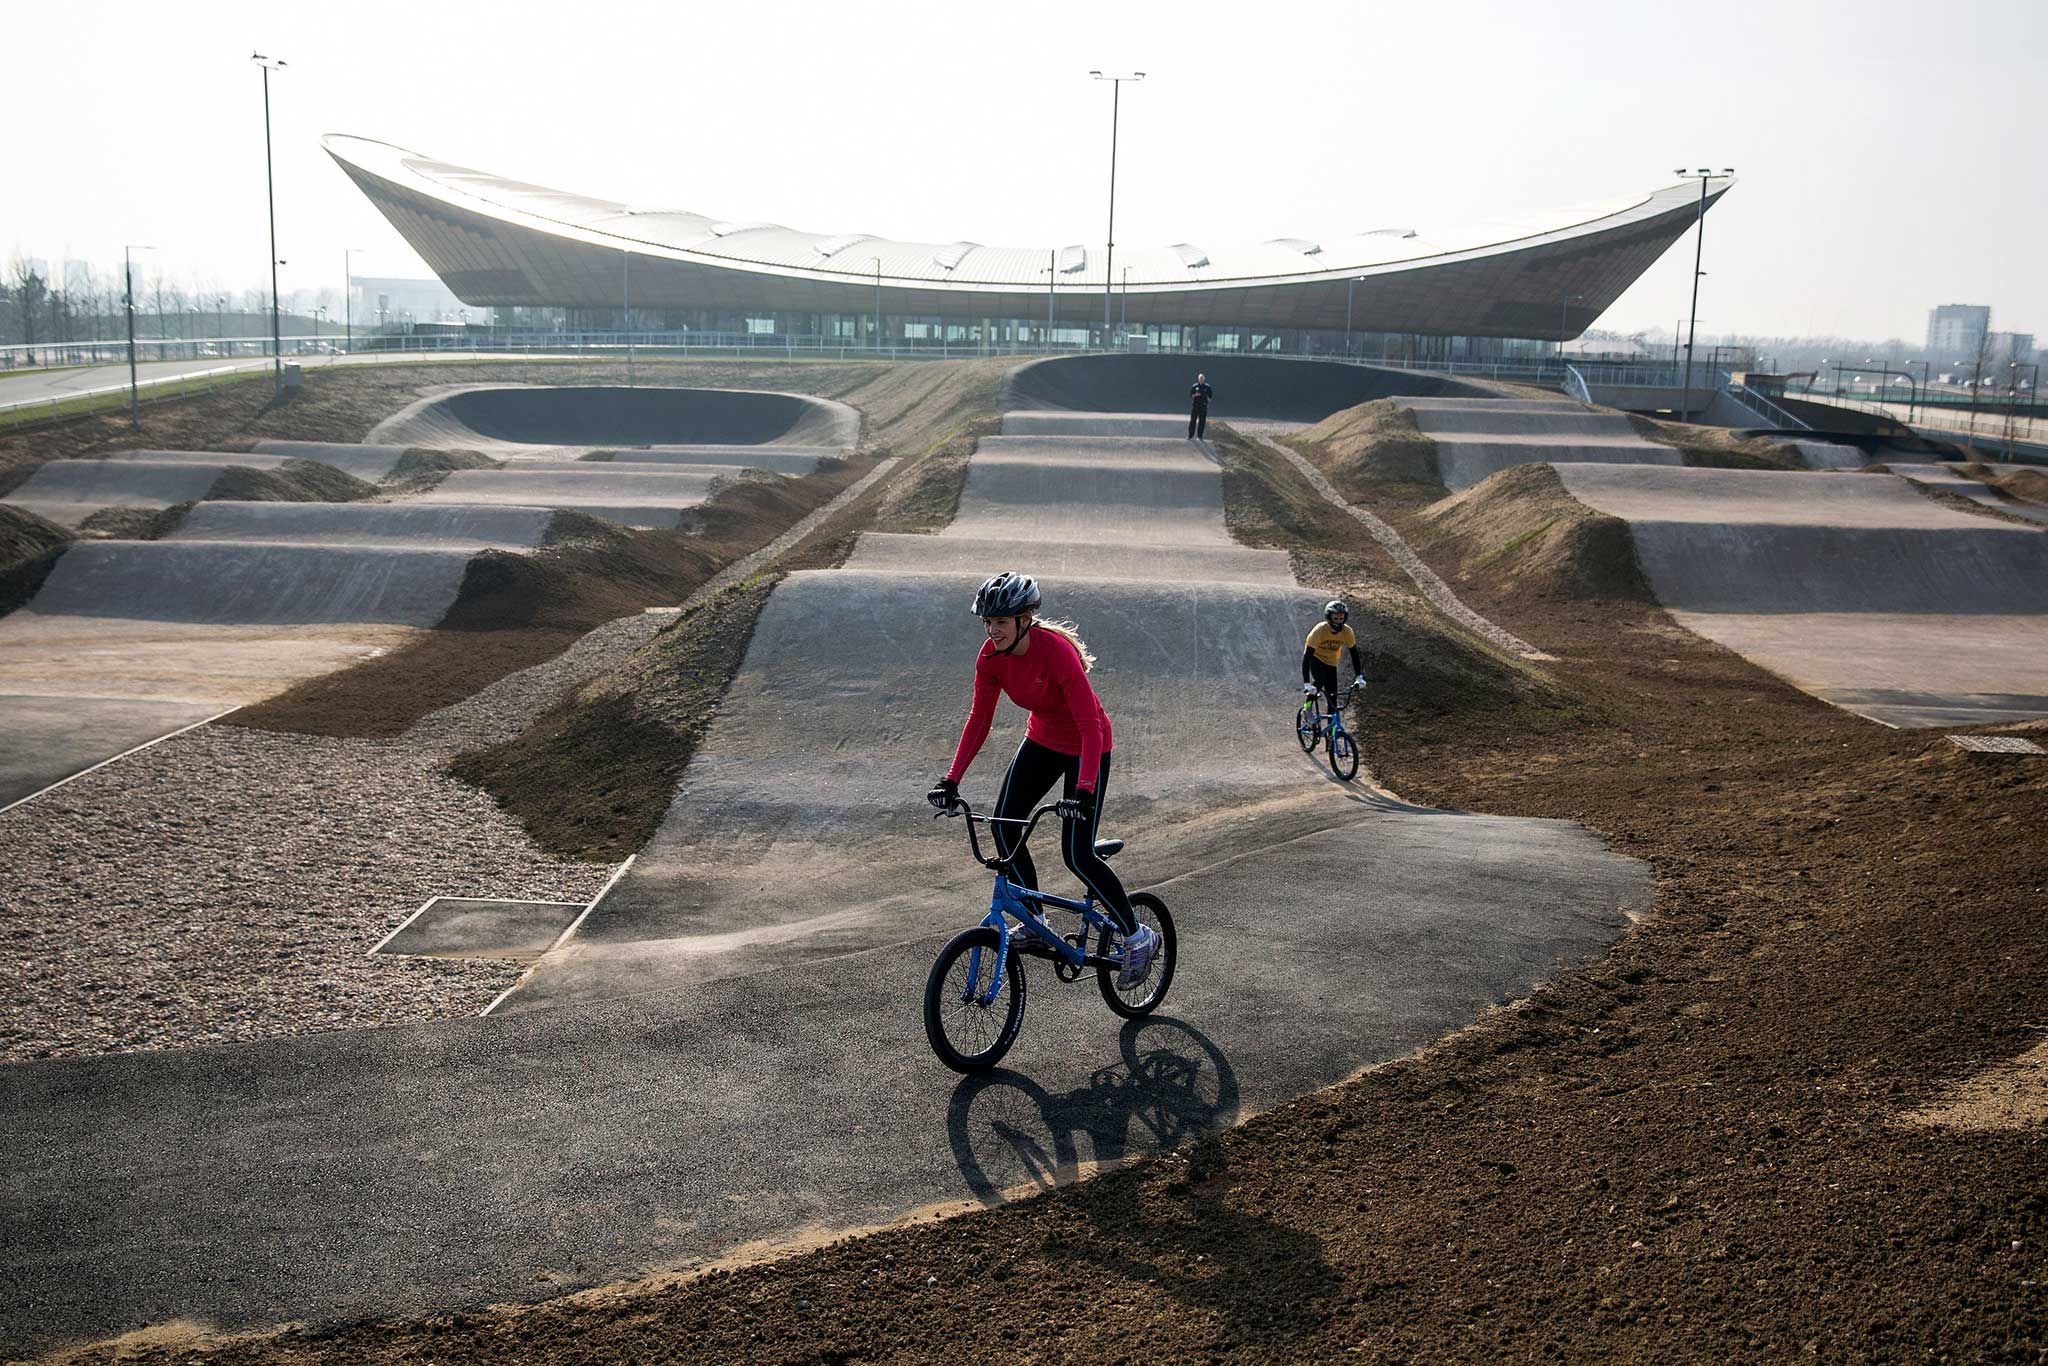 The Olympic BMX track in East London re-opened last week